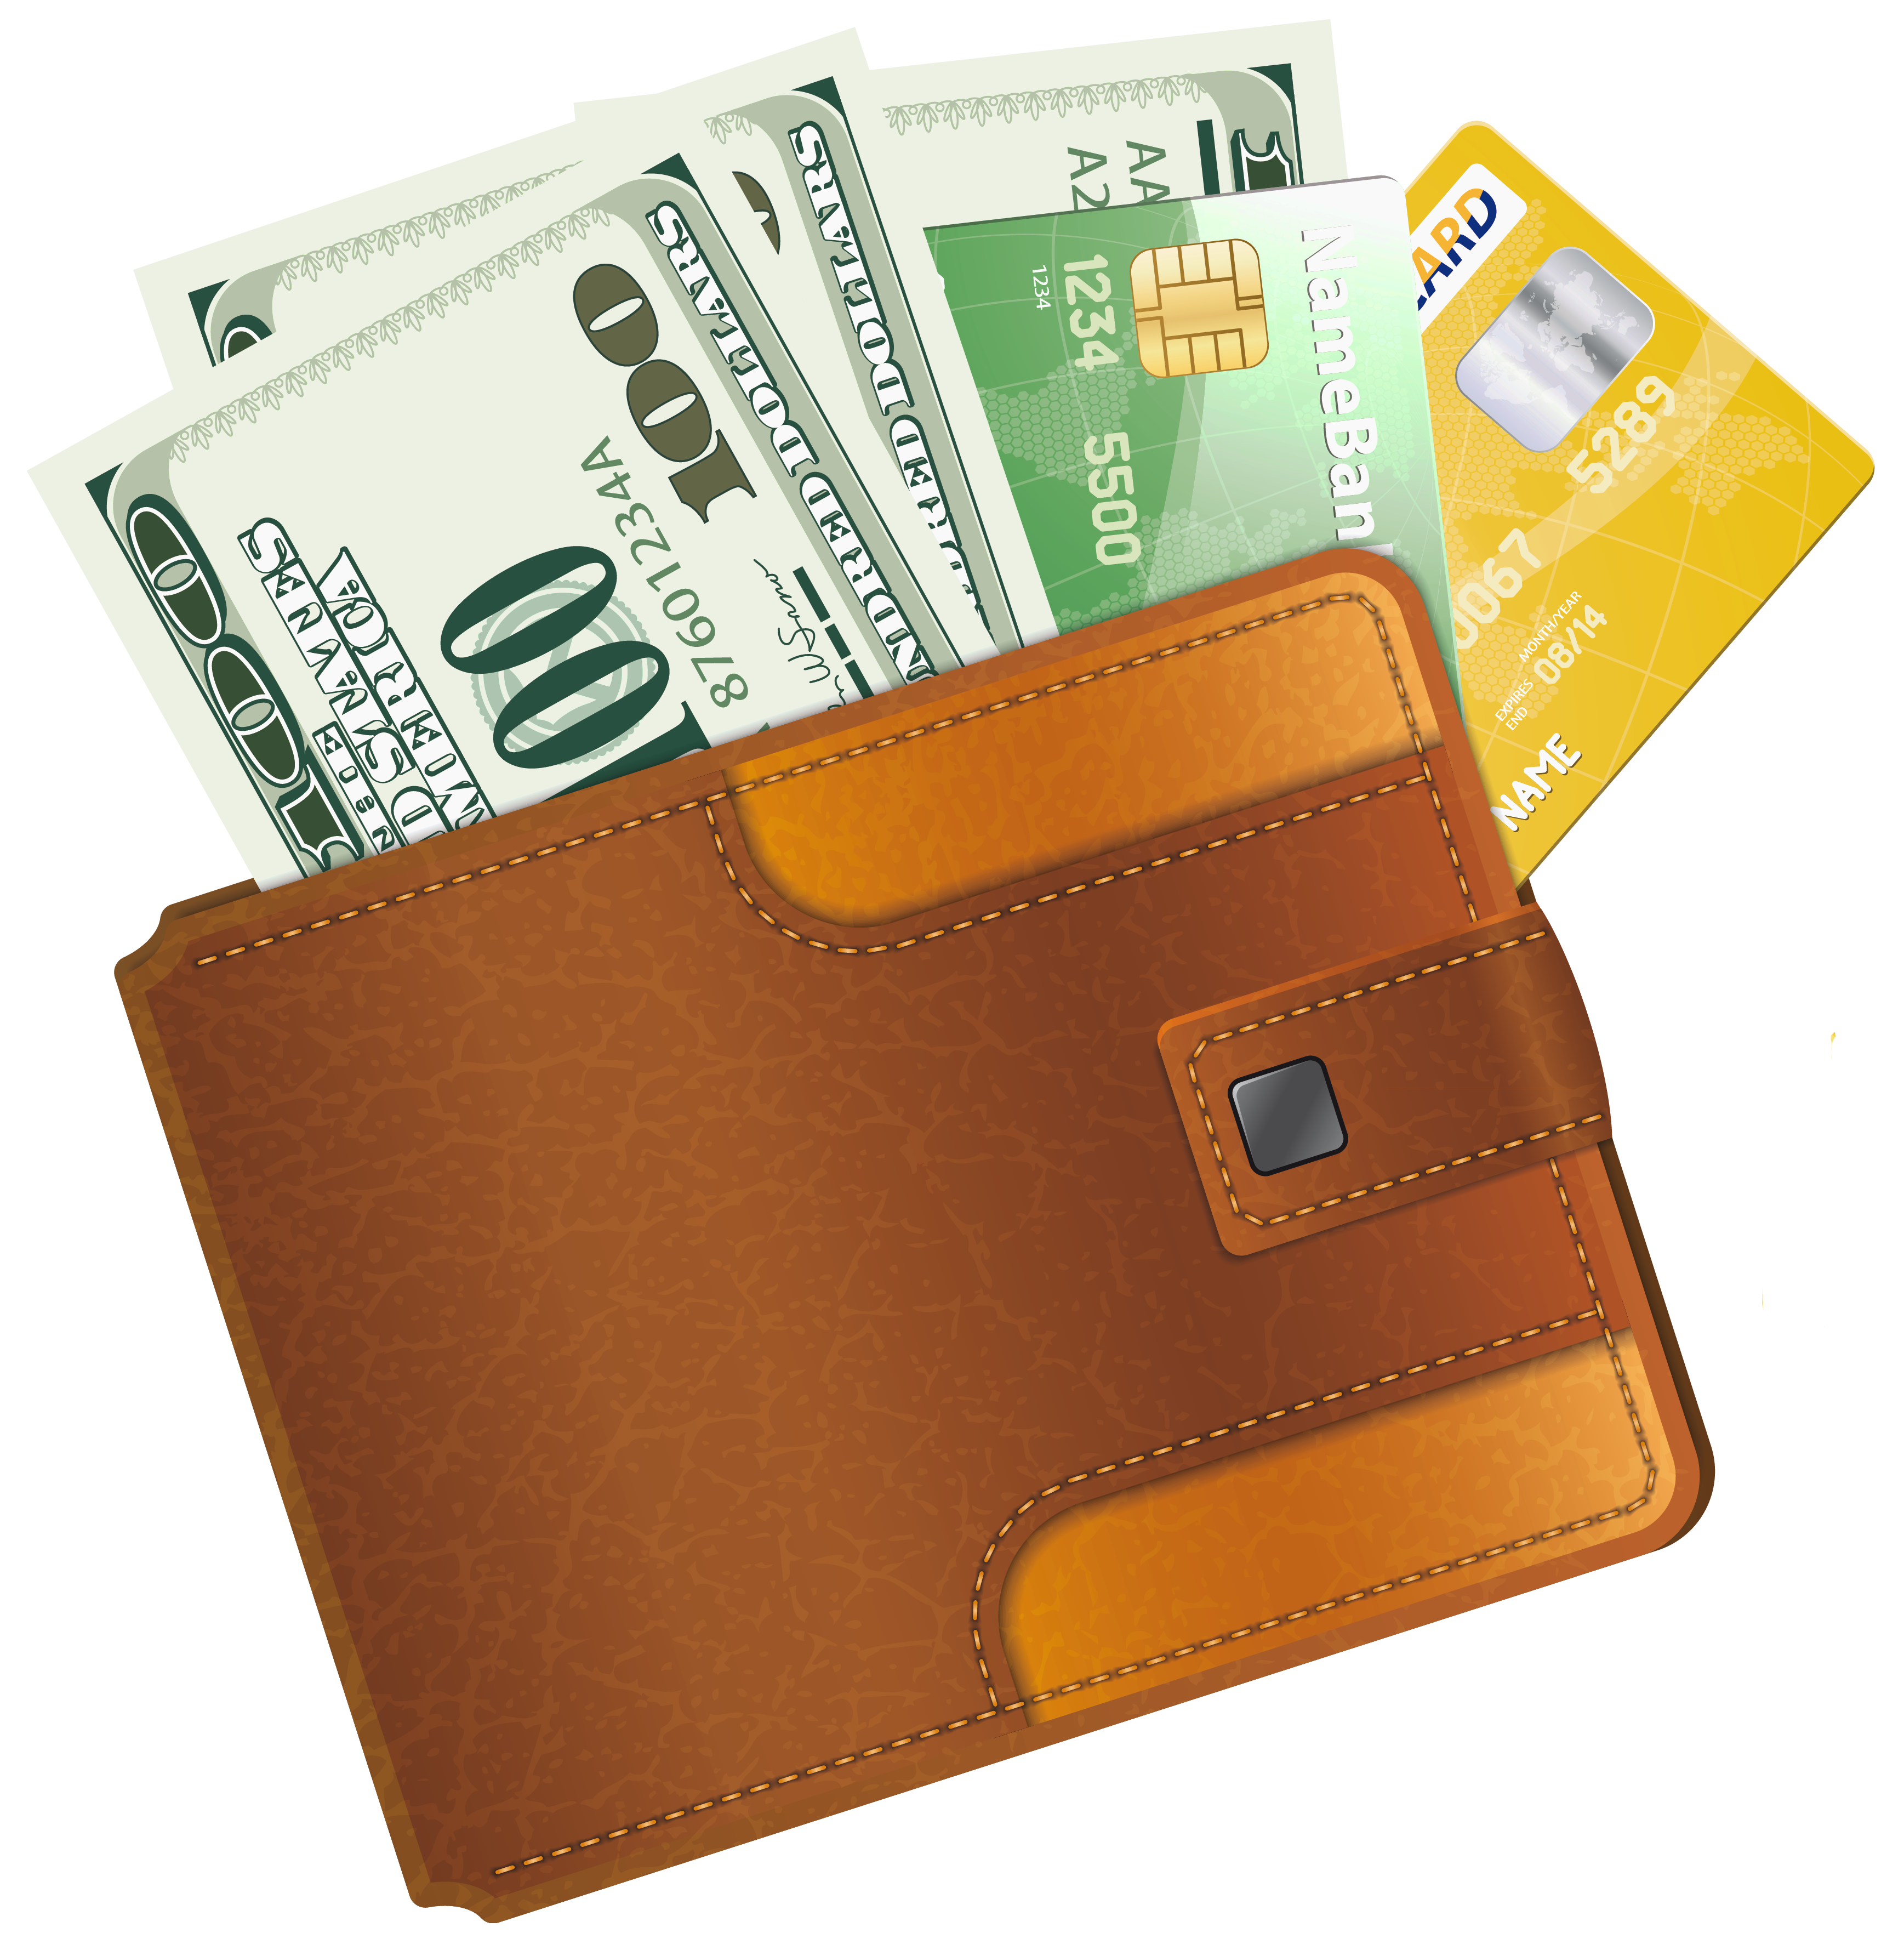 Wallet with credit cards. Money clip art png